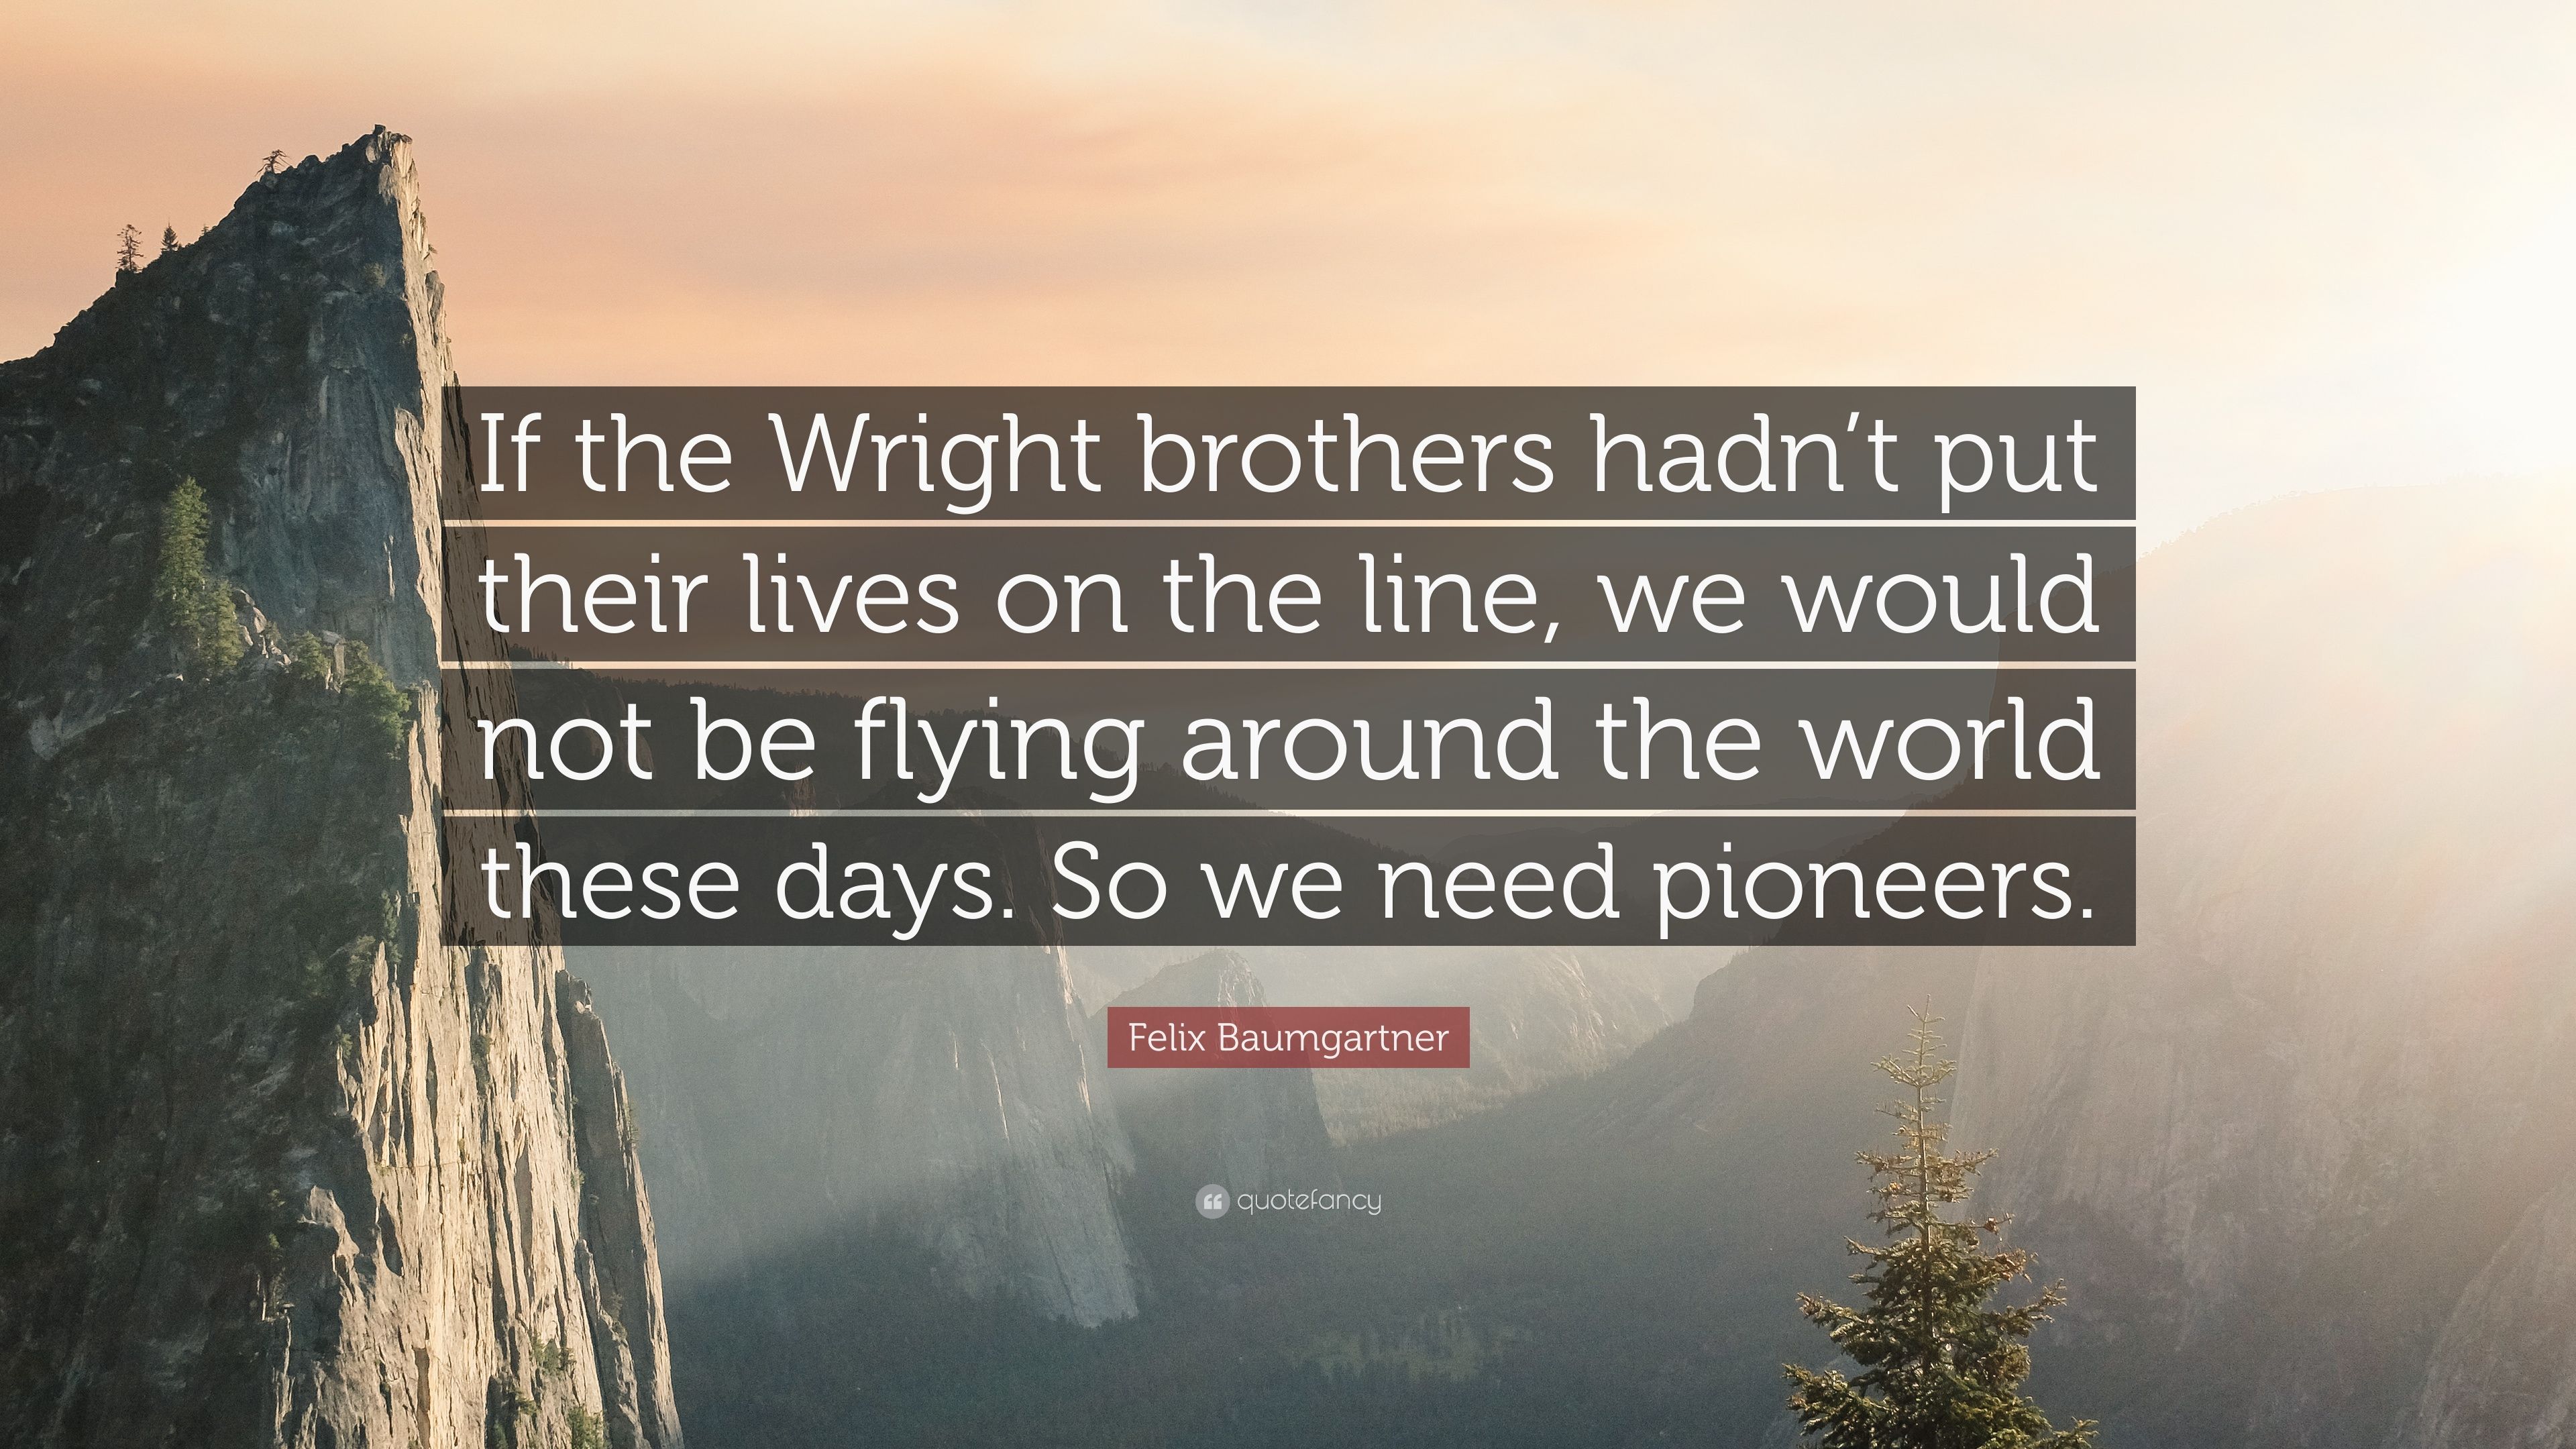 Felix Baumgartner Quote: “If the Wright brothers hadn't put their lives on the line, we would not be flying around the world these days. So we nee.” (7 wallpaper)